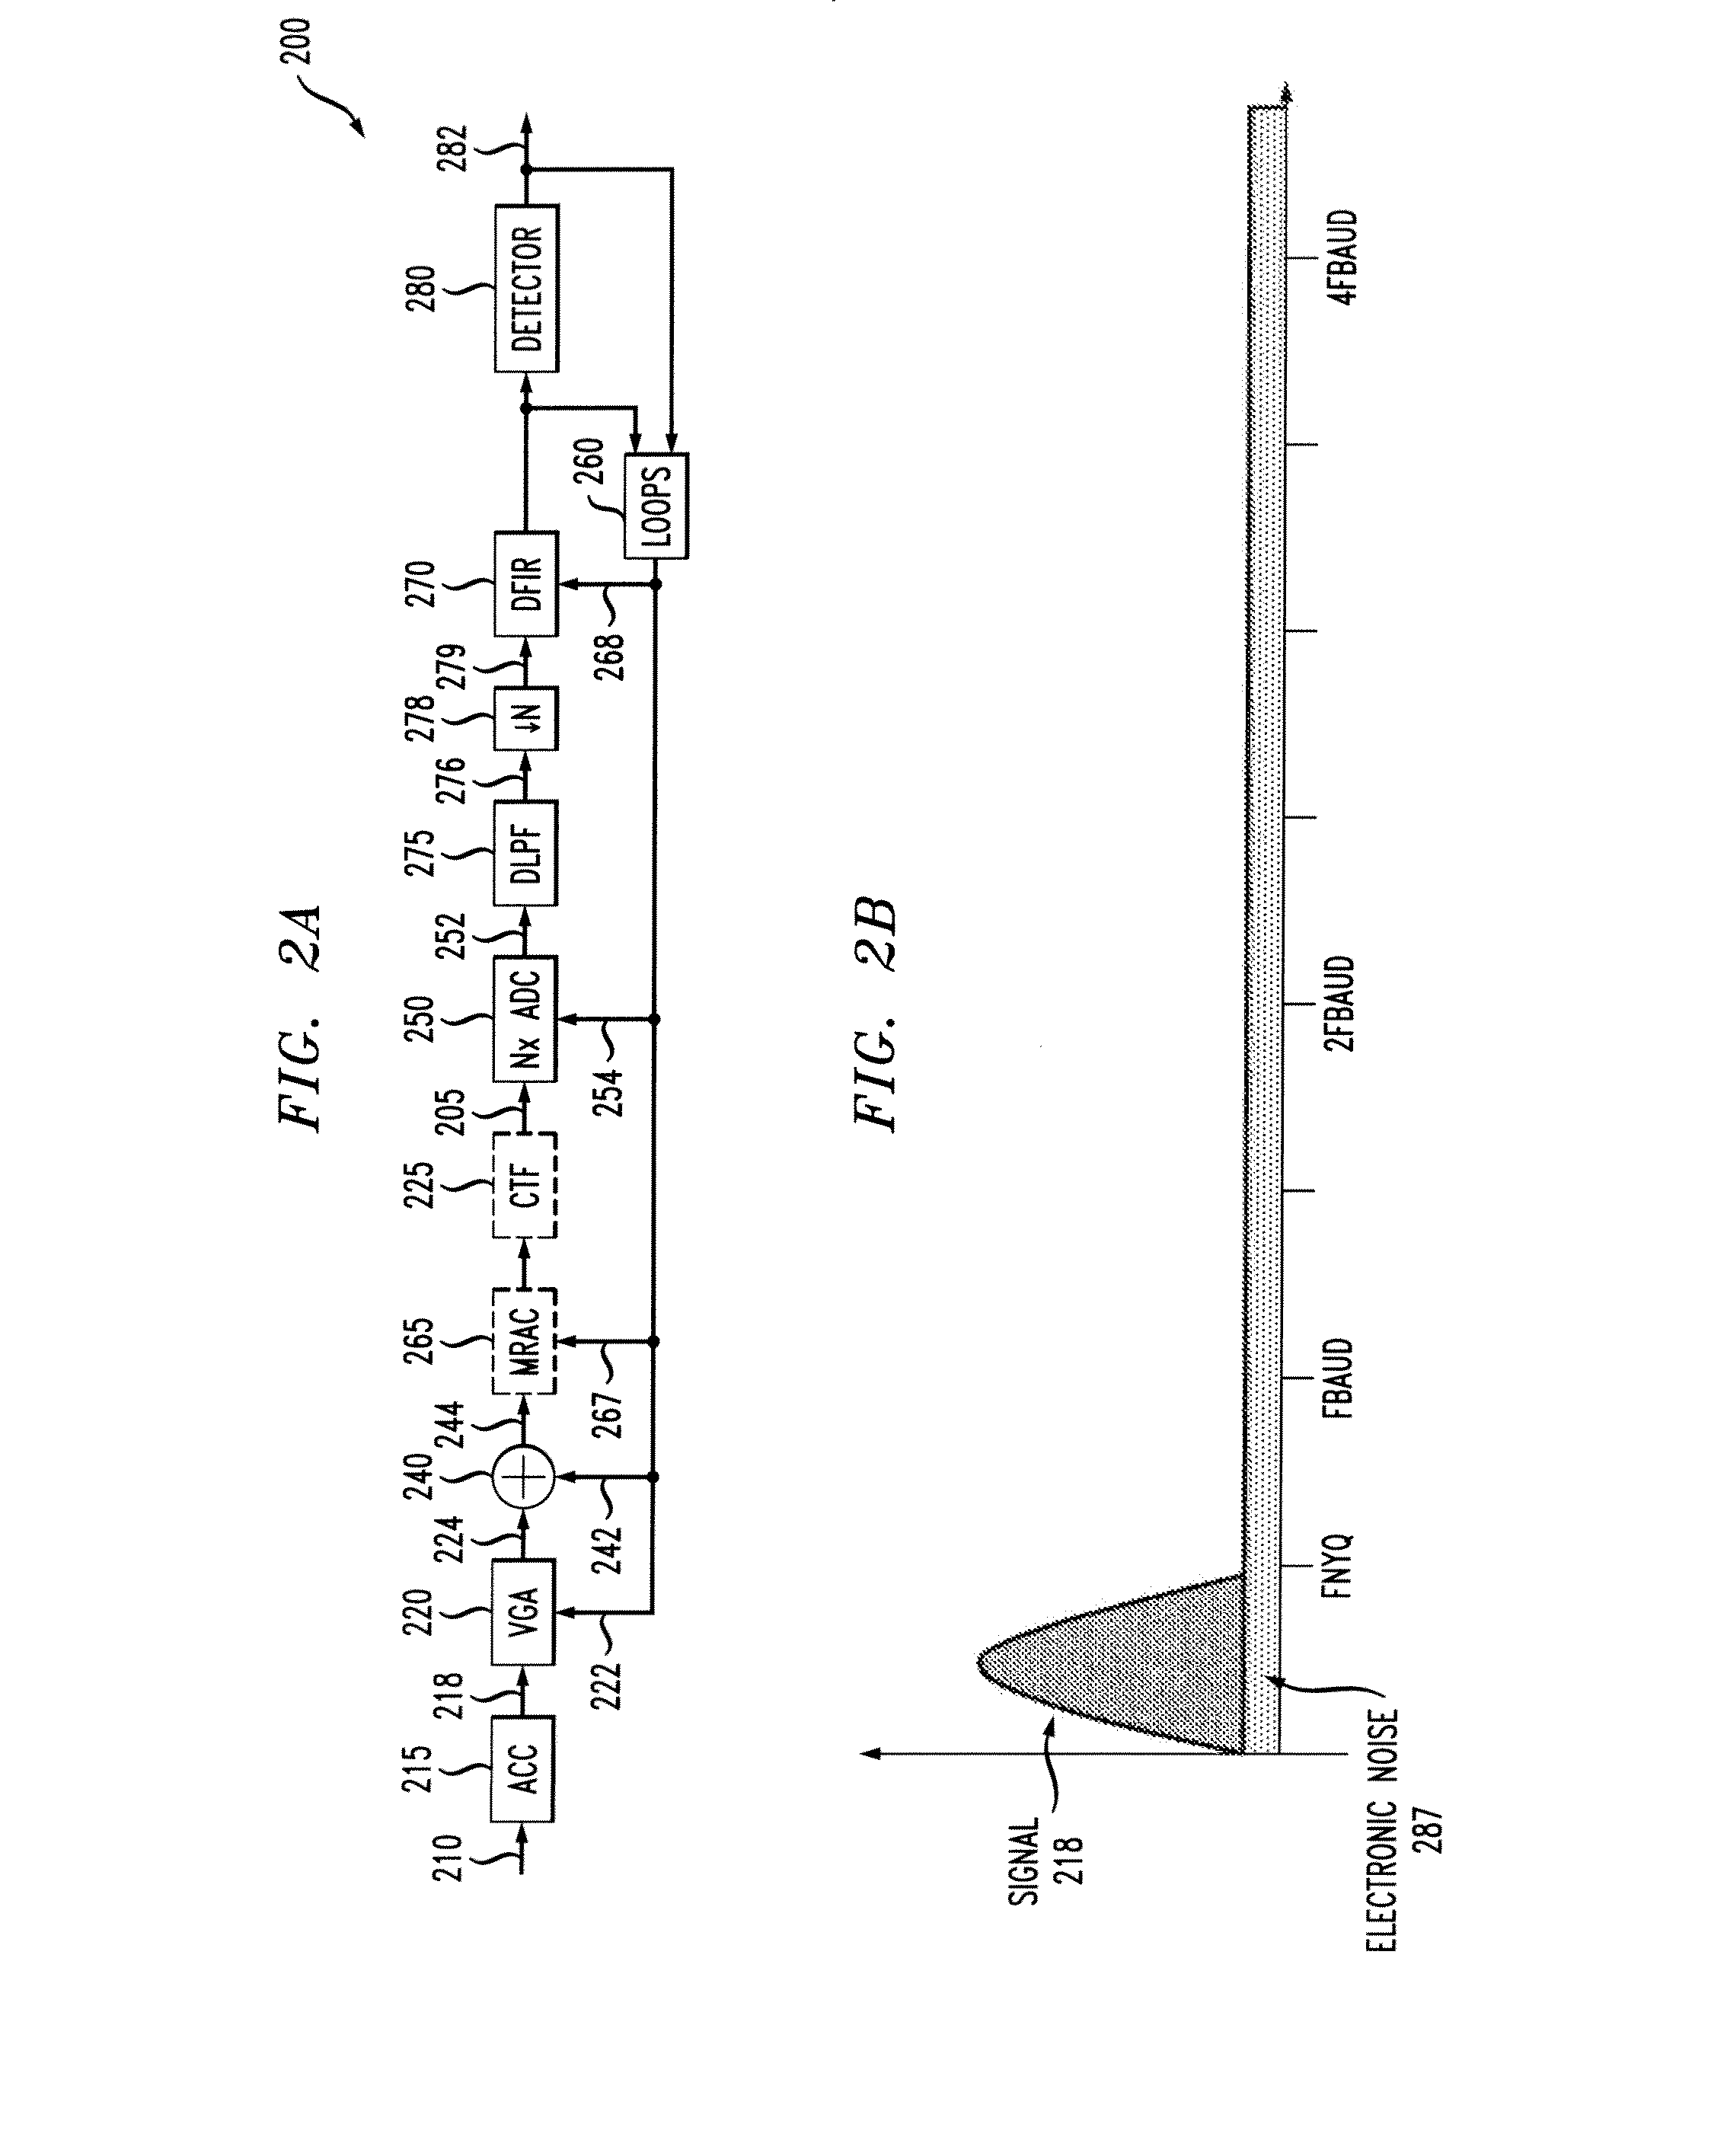 Determining Coefficients For Digital Low Pass Filter Given Cutoff And Boost Values For Corresponding Analog Version